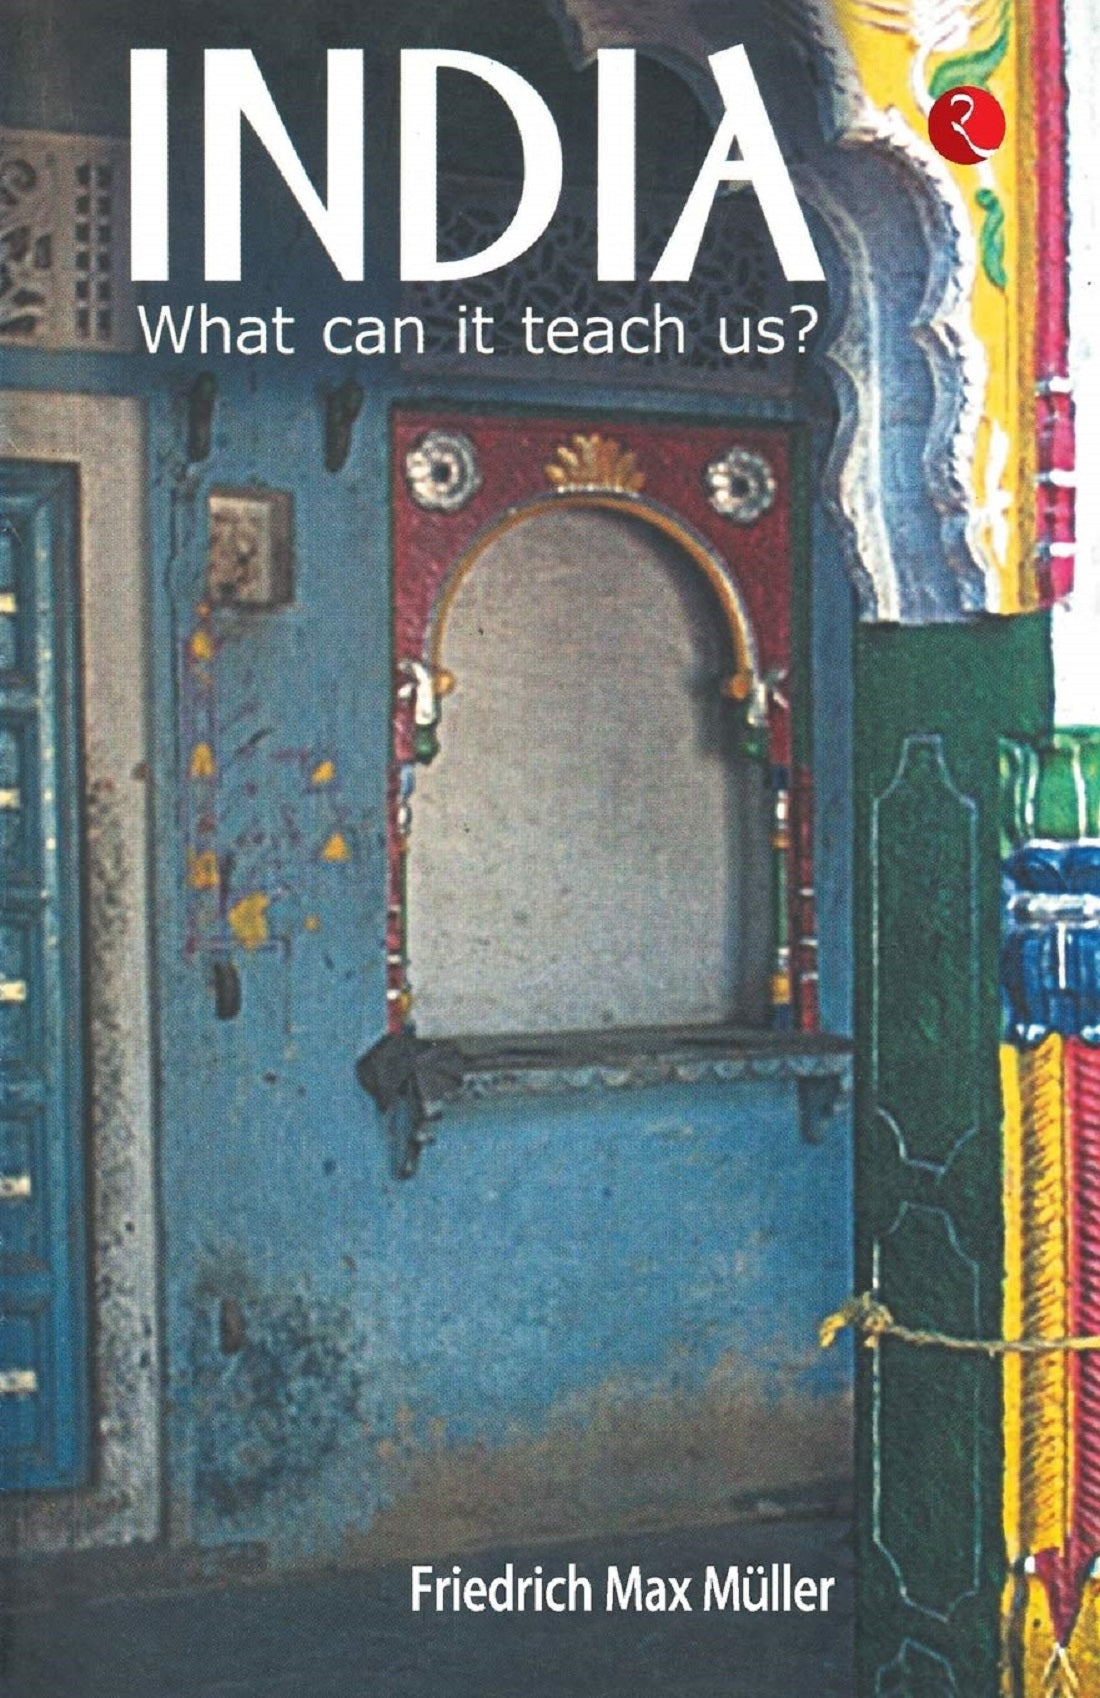 INDIA WHAT CAN IT TEACH US?